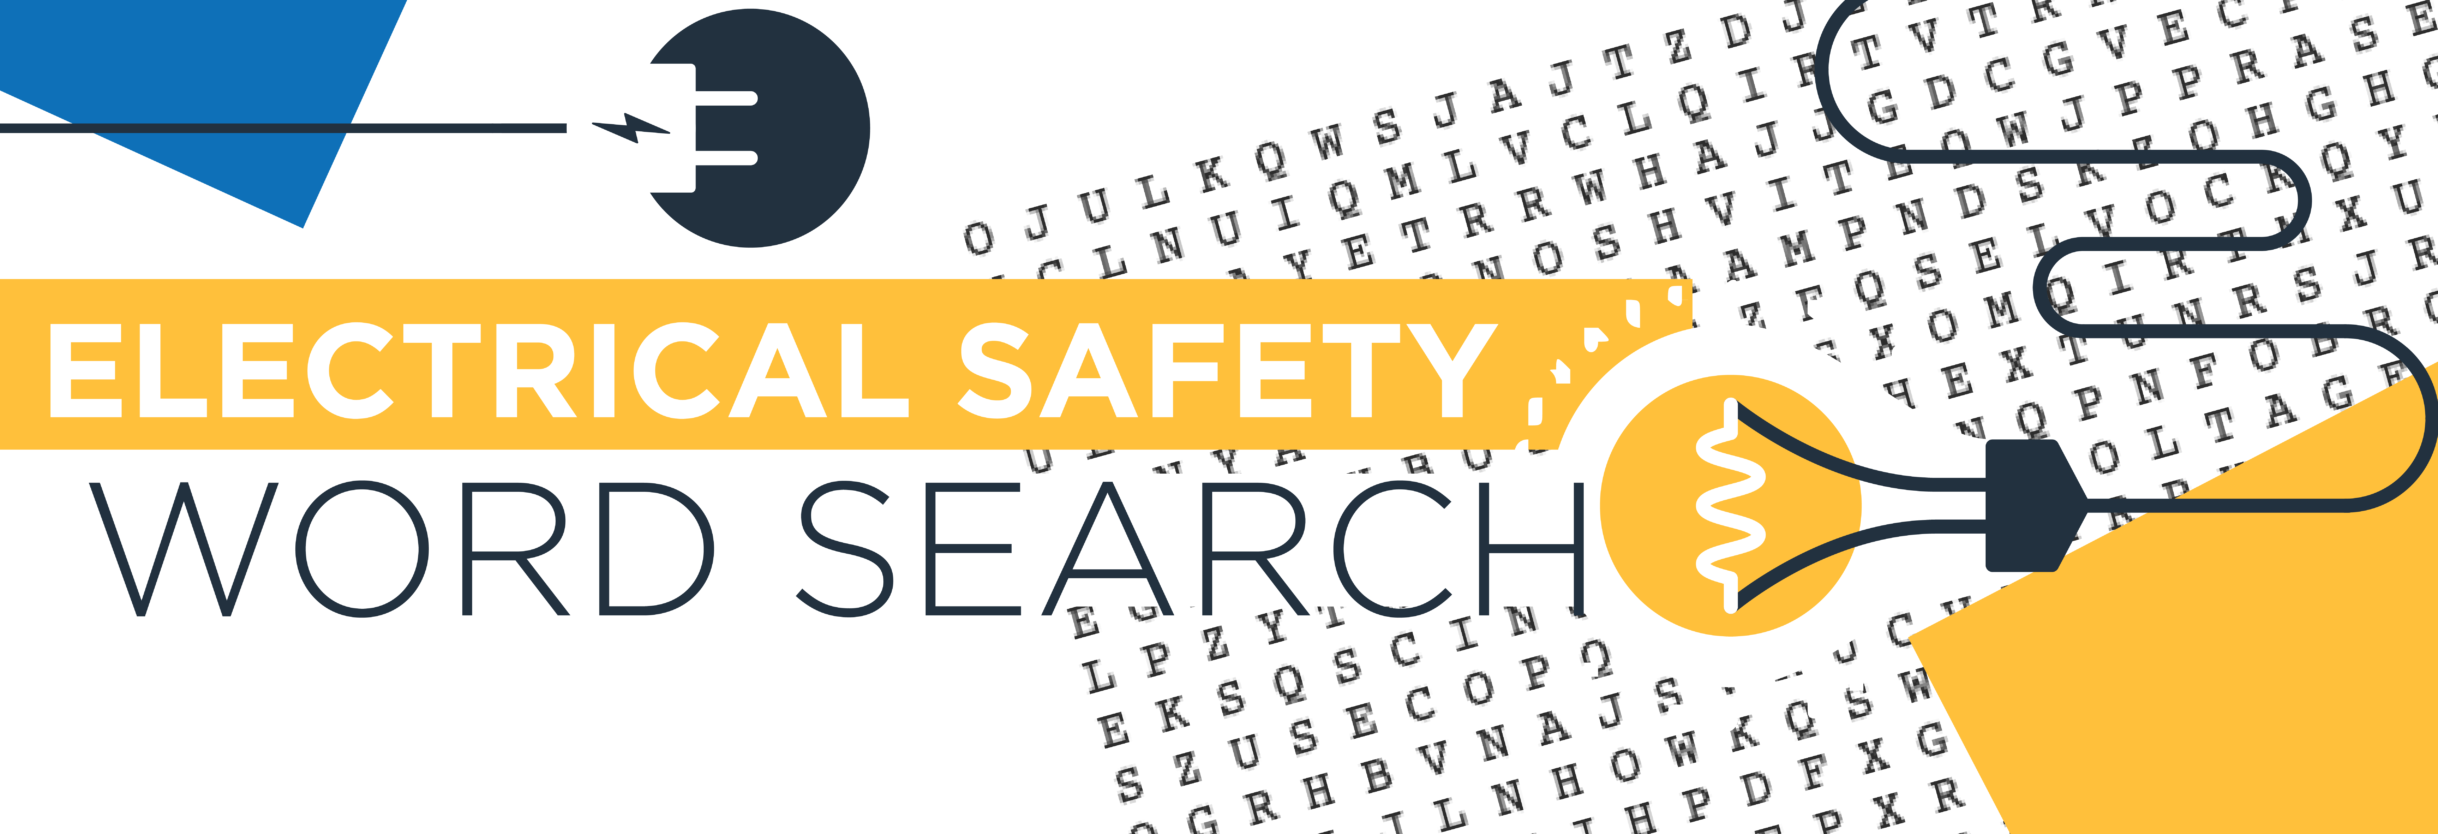 SECO News August 2020: Electrical Safety Word Search